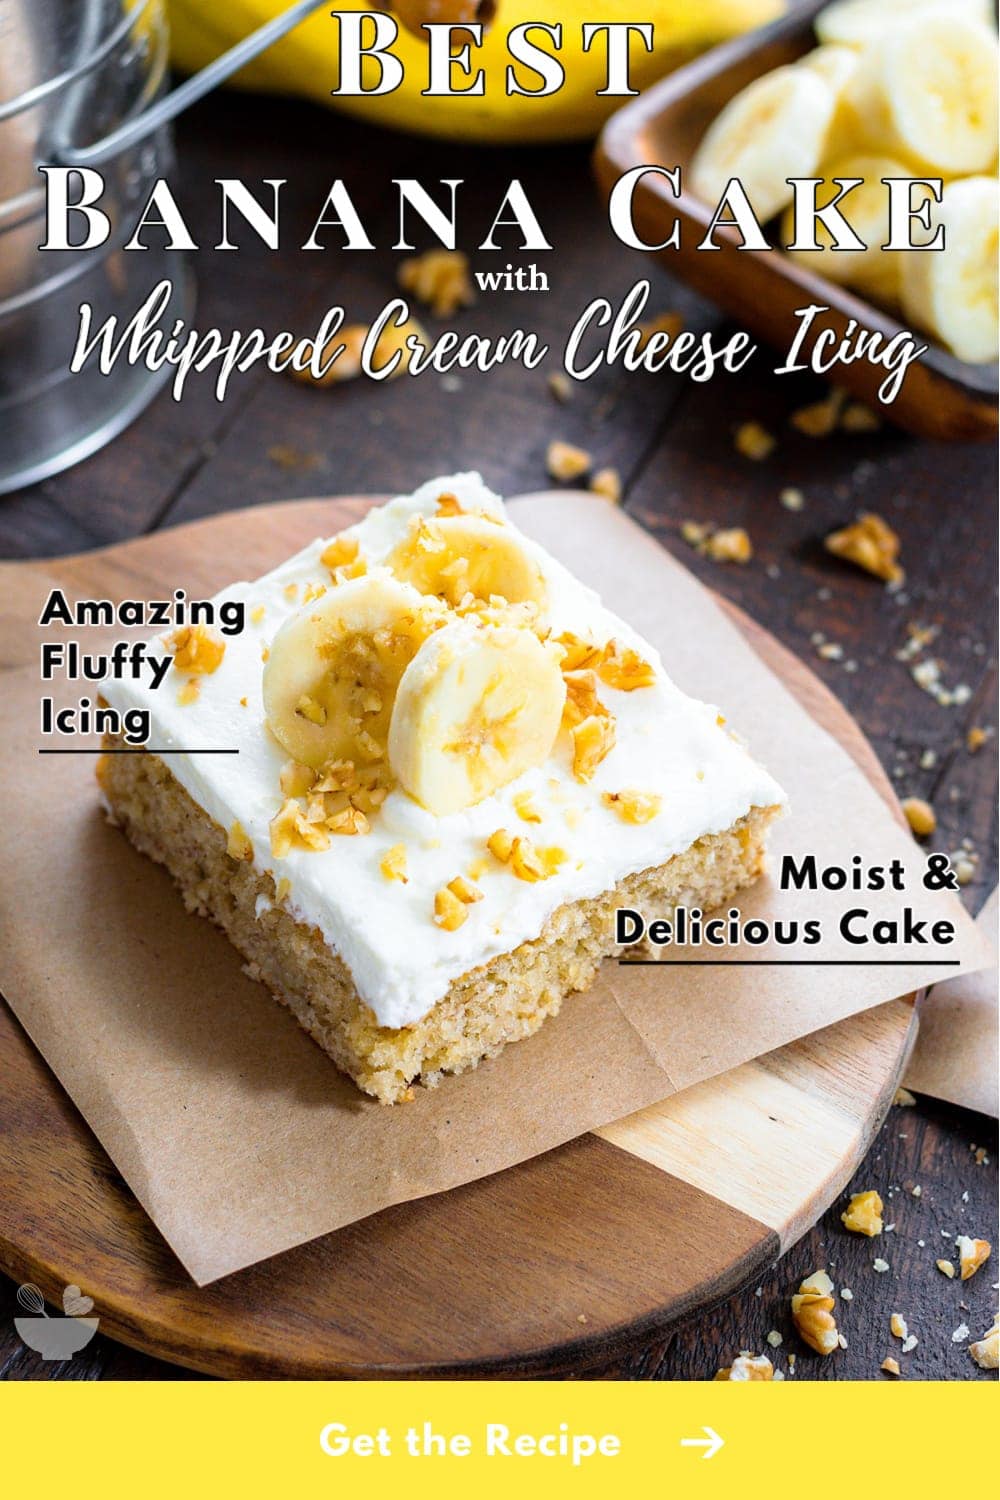 Banana Cake infographic image describing the cake as moist & delicious and the icing as amazingly fluffy.